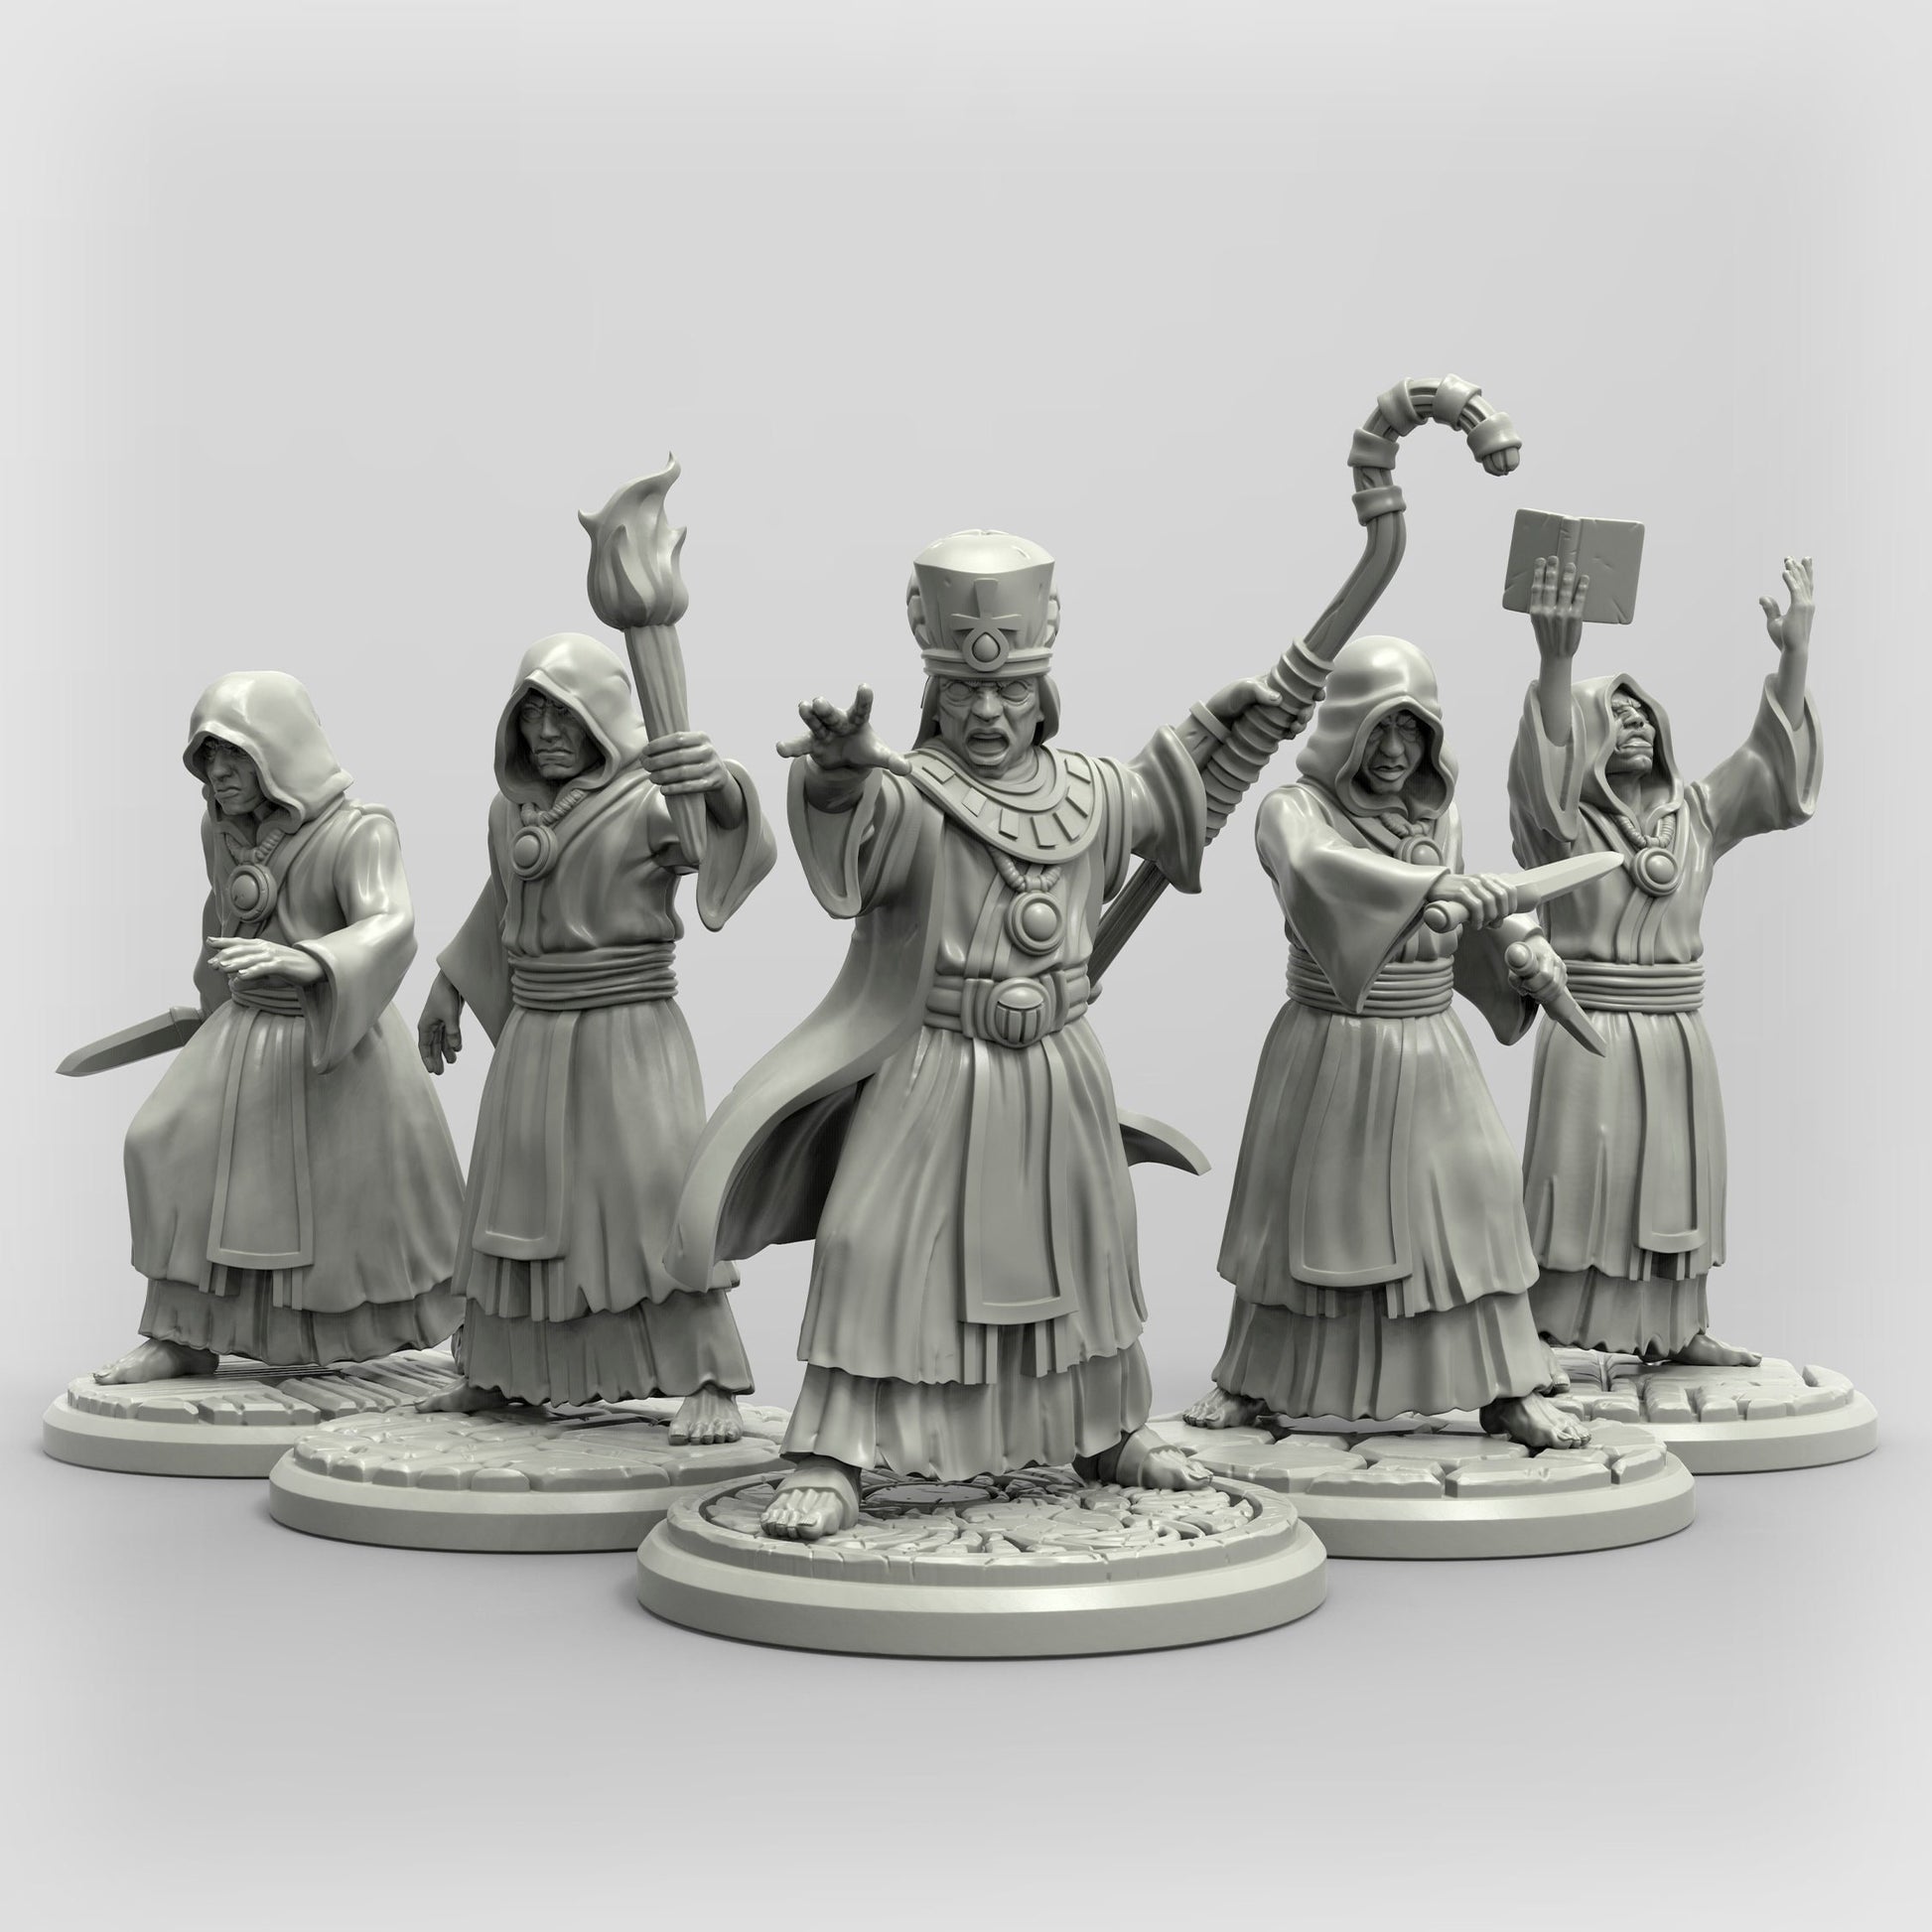 High Priest and Cultists - set of 5 (sculpted by Adaevy Creations)